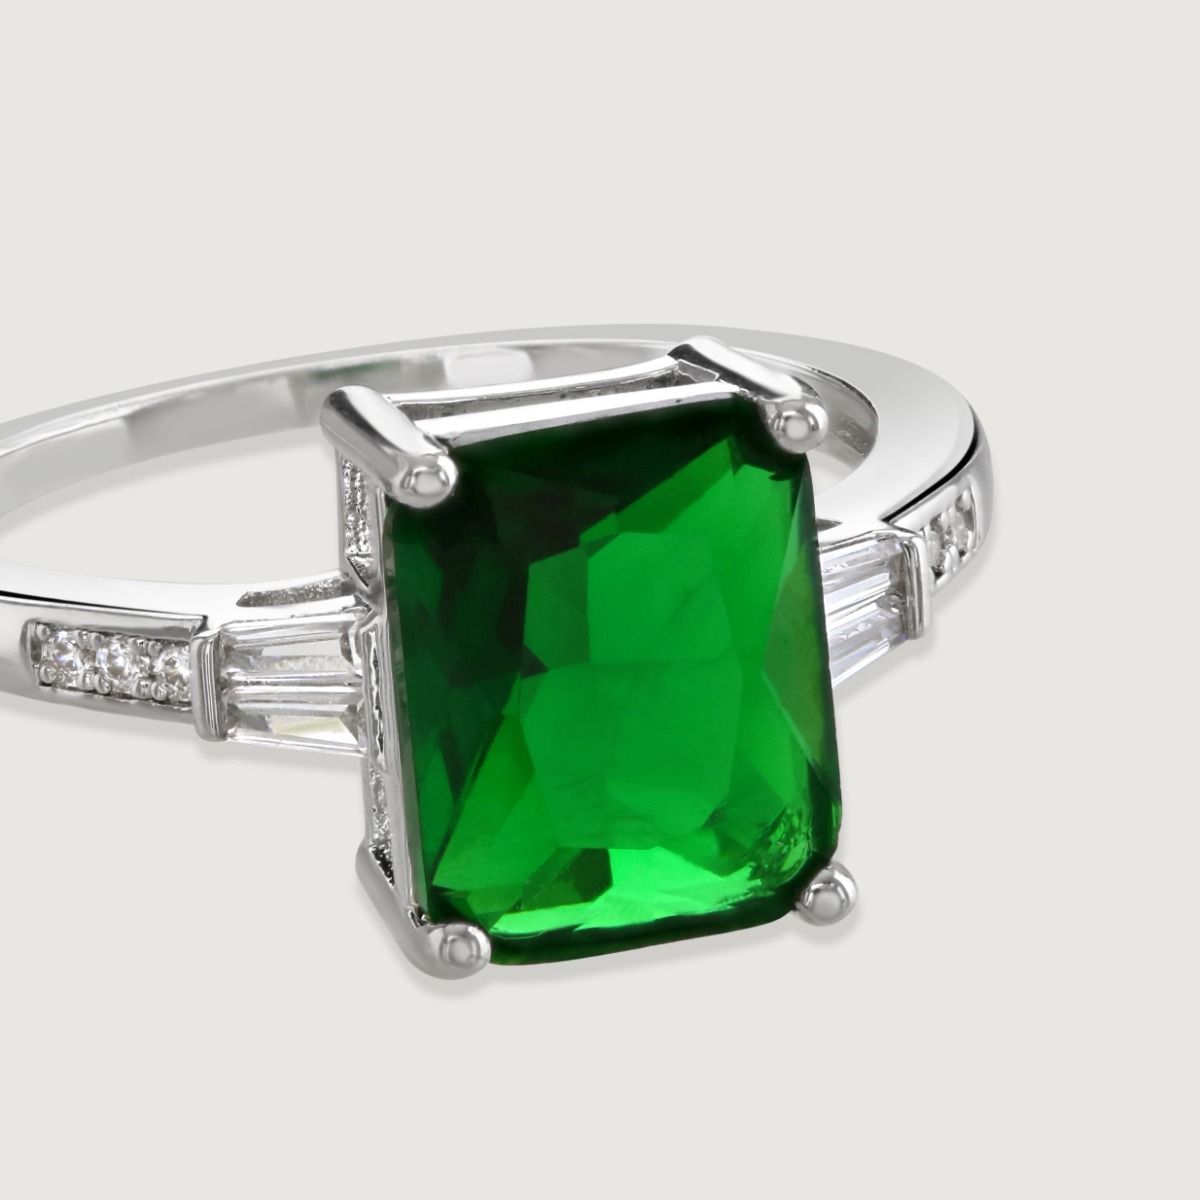 The Emerald Baguette with Tapered Baguette Shoulder Ring is a stunning art deco inspired ring featuring an immaculate baguette cut central glass stone, with tapered stone baguette sides flawlessly faceted for maximum sparkle.